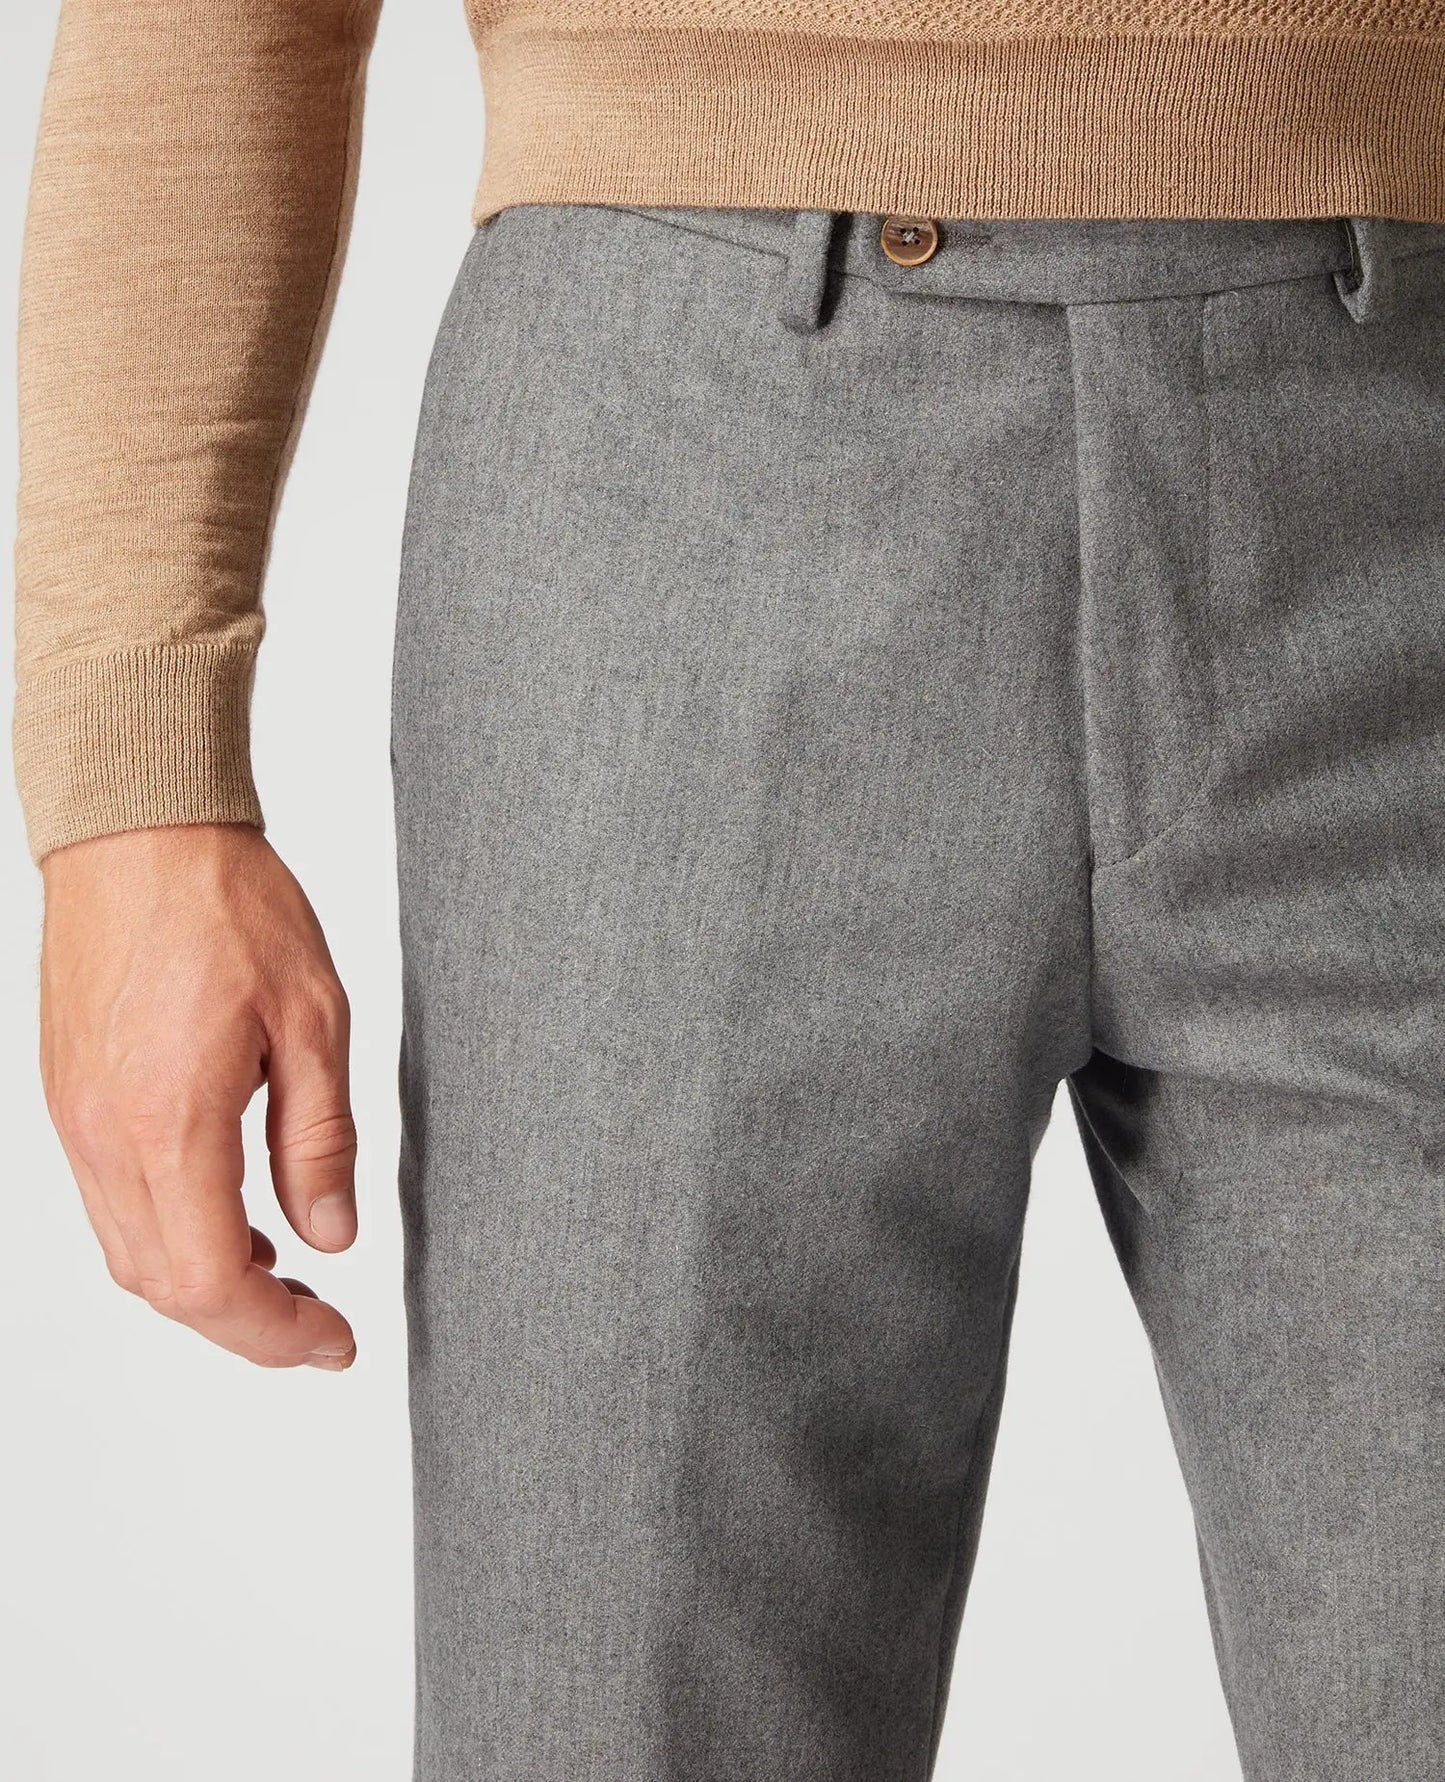 Remus Uomo Sabino Grey Textured Trousers From Woven Durham